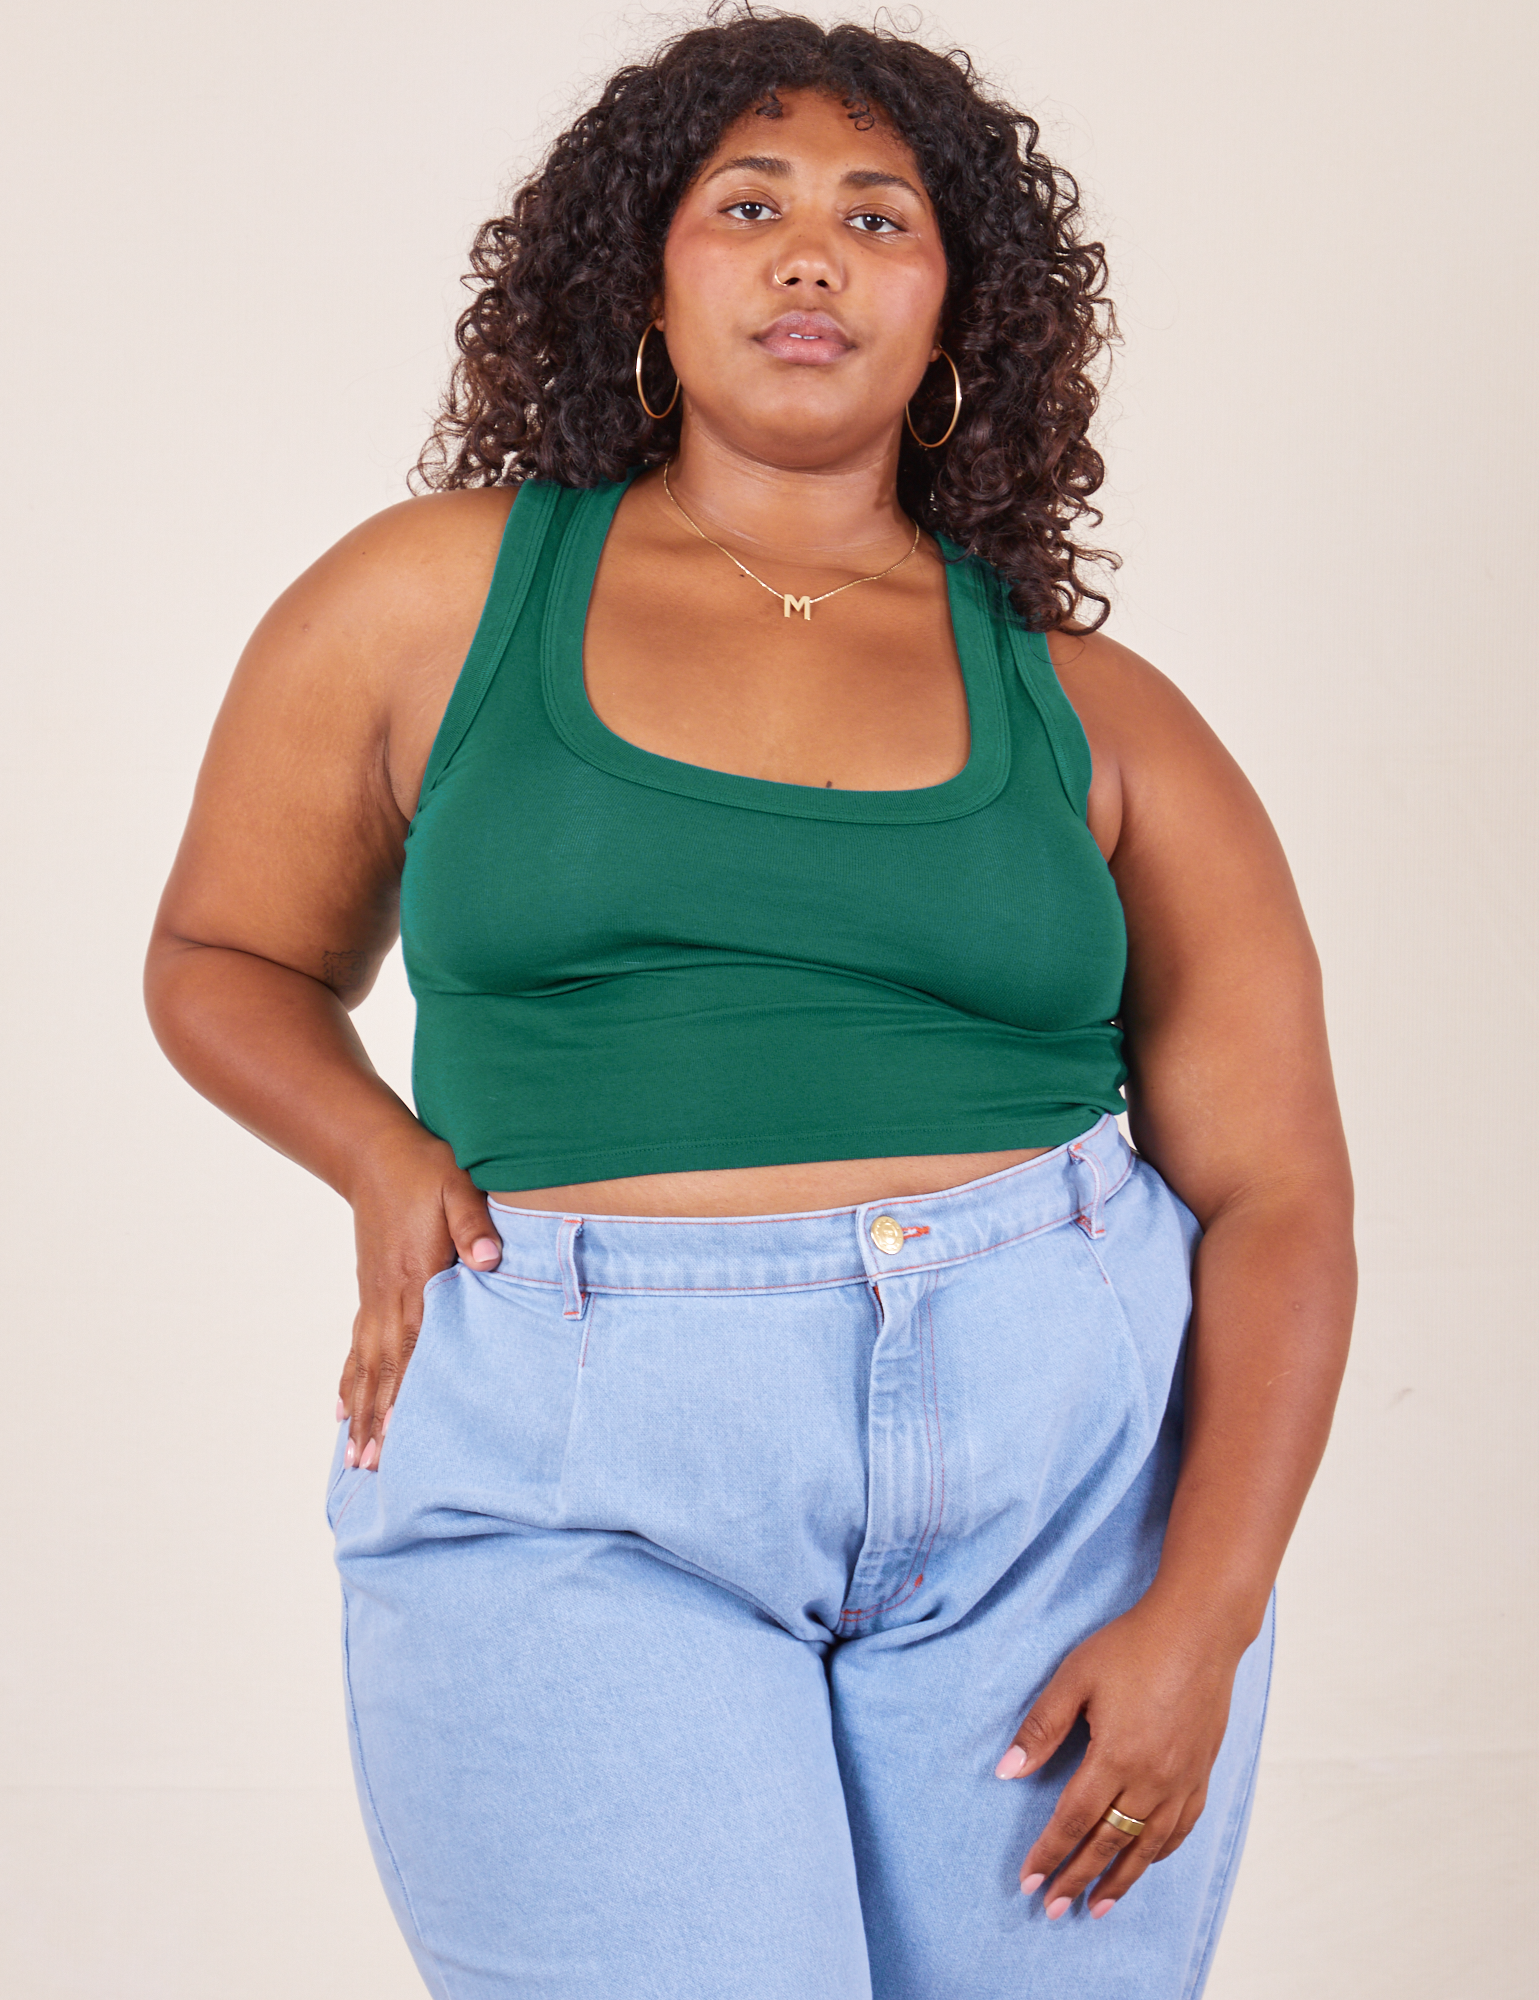 Morgan is 5&#39;5&quot; and wearing L Cropped Tank Top in Hunter Green